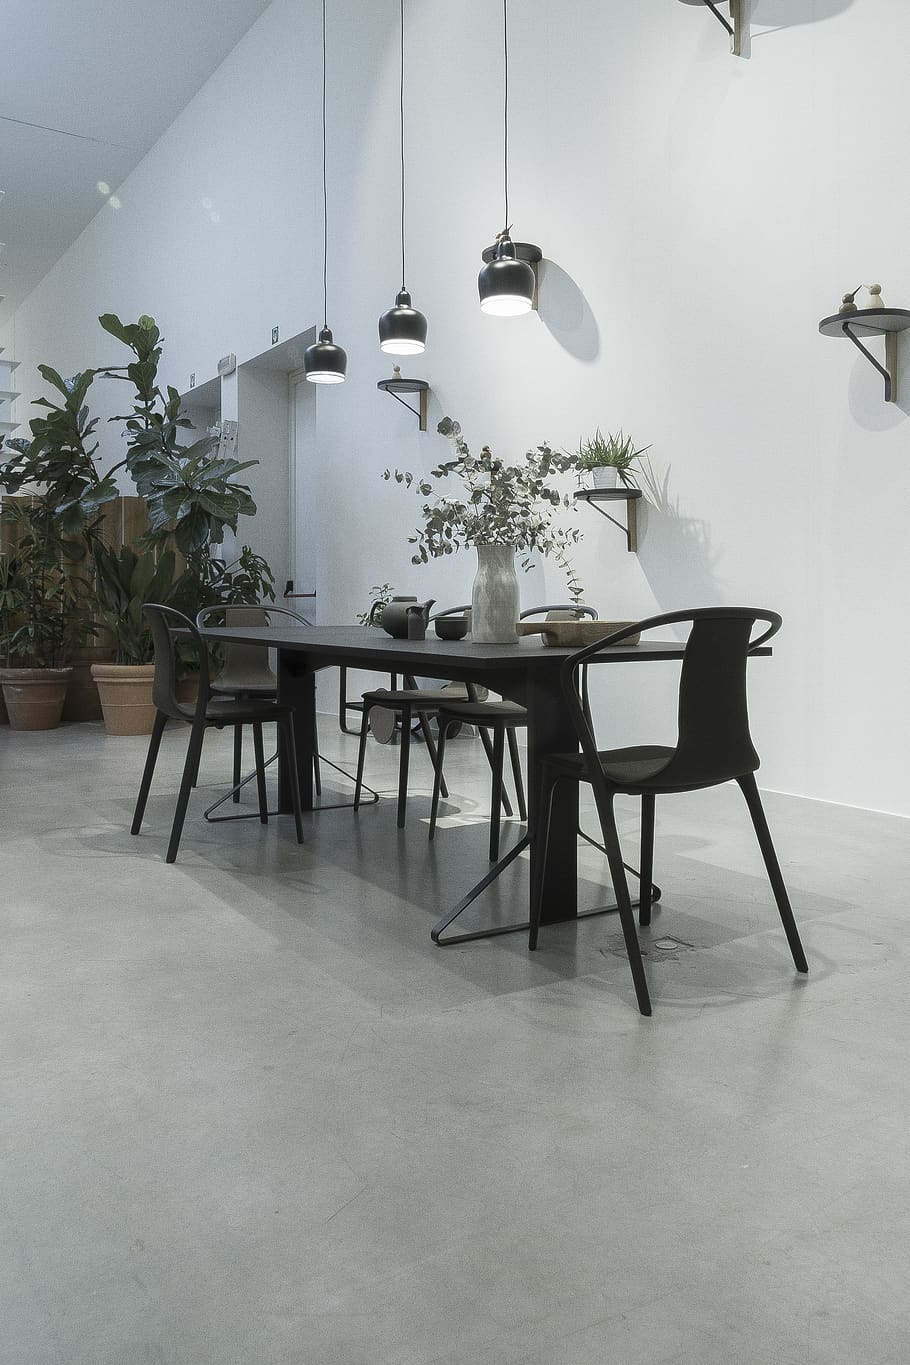 black wooden table and metal chairs near white wall with three pendant lamps above table